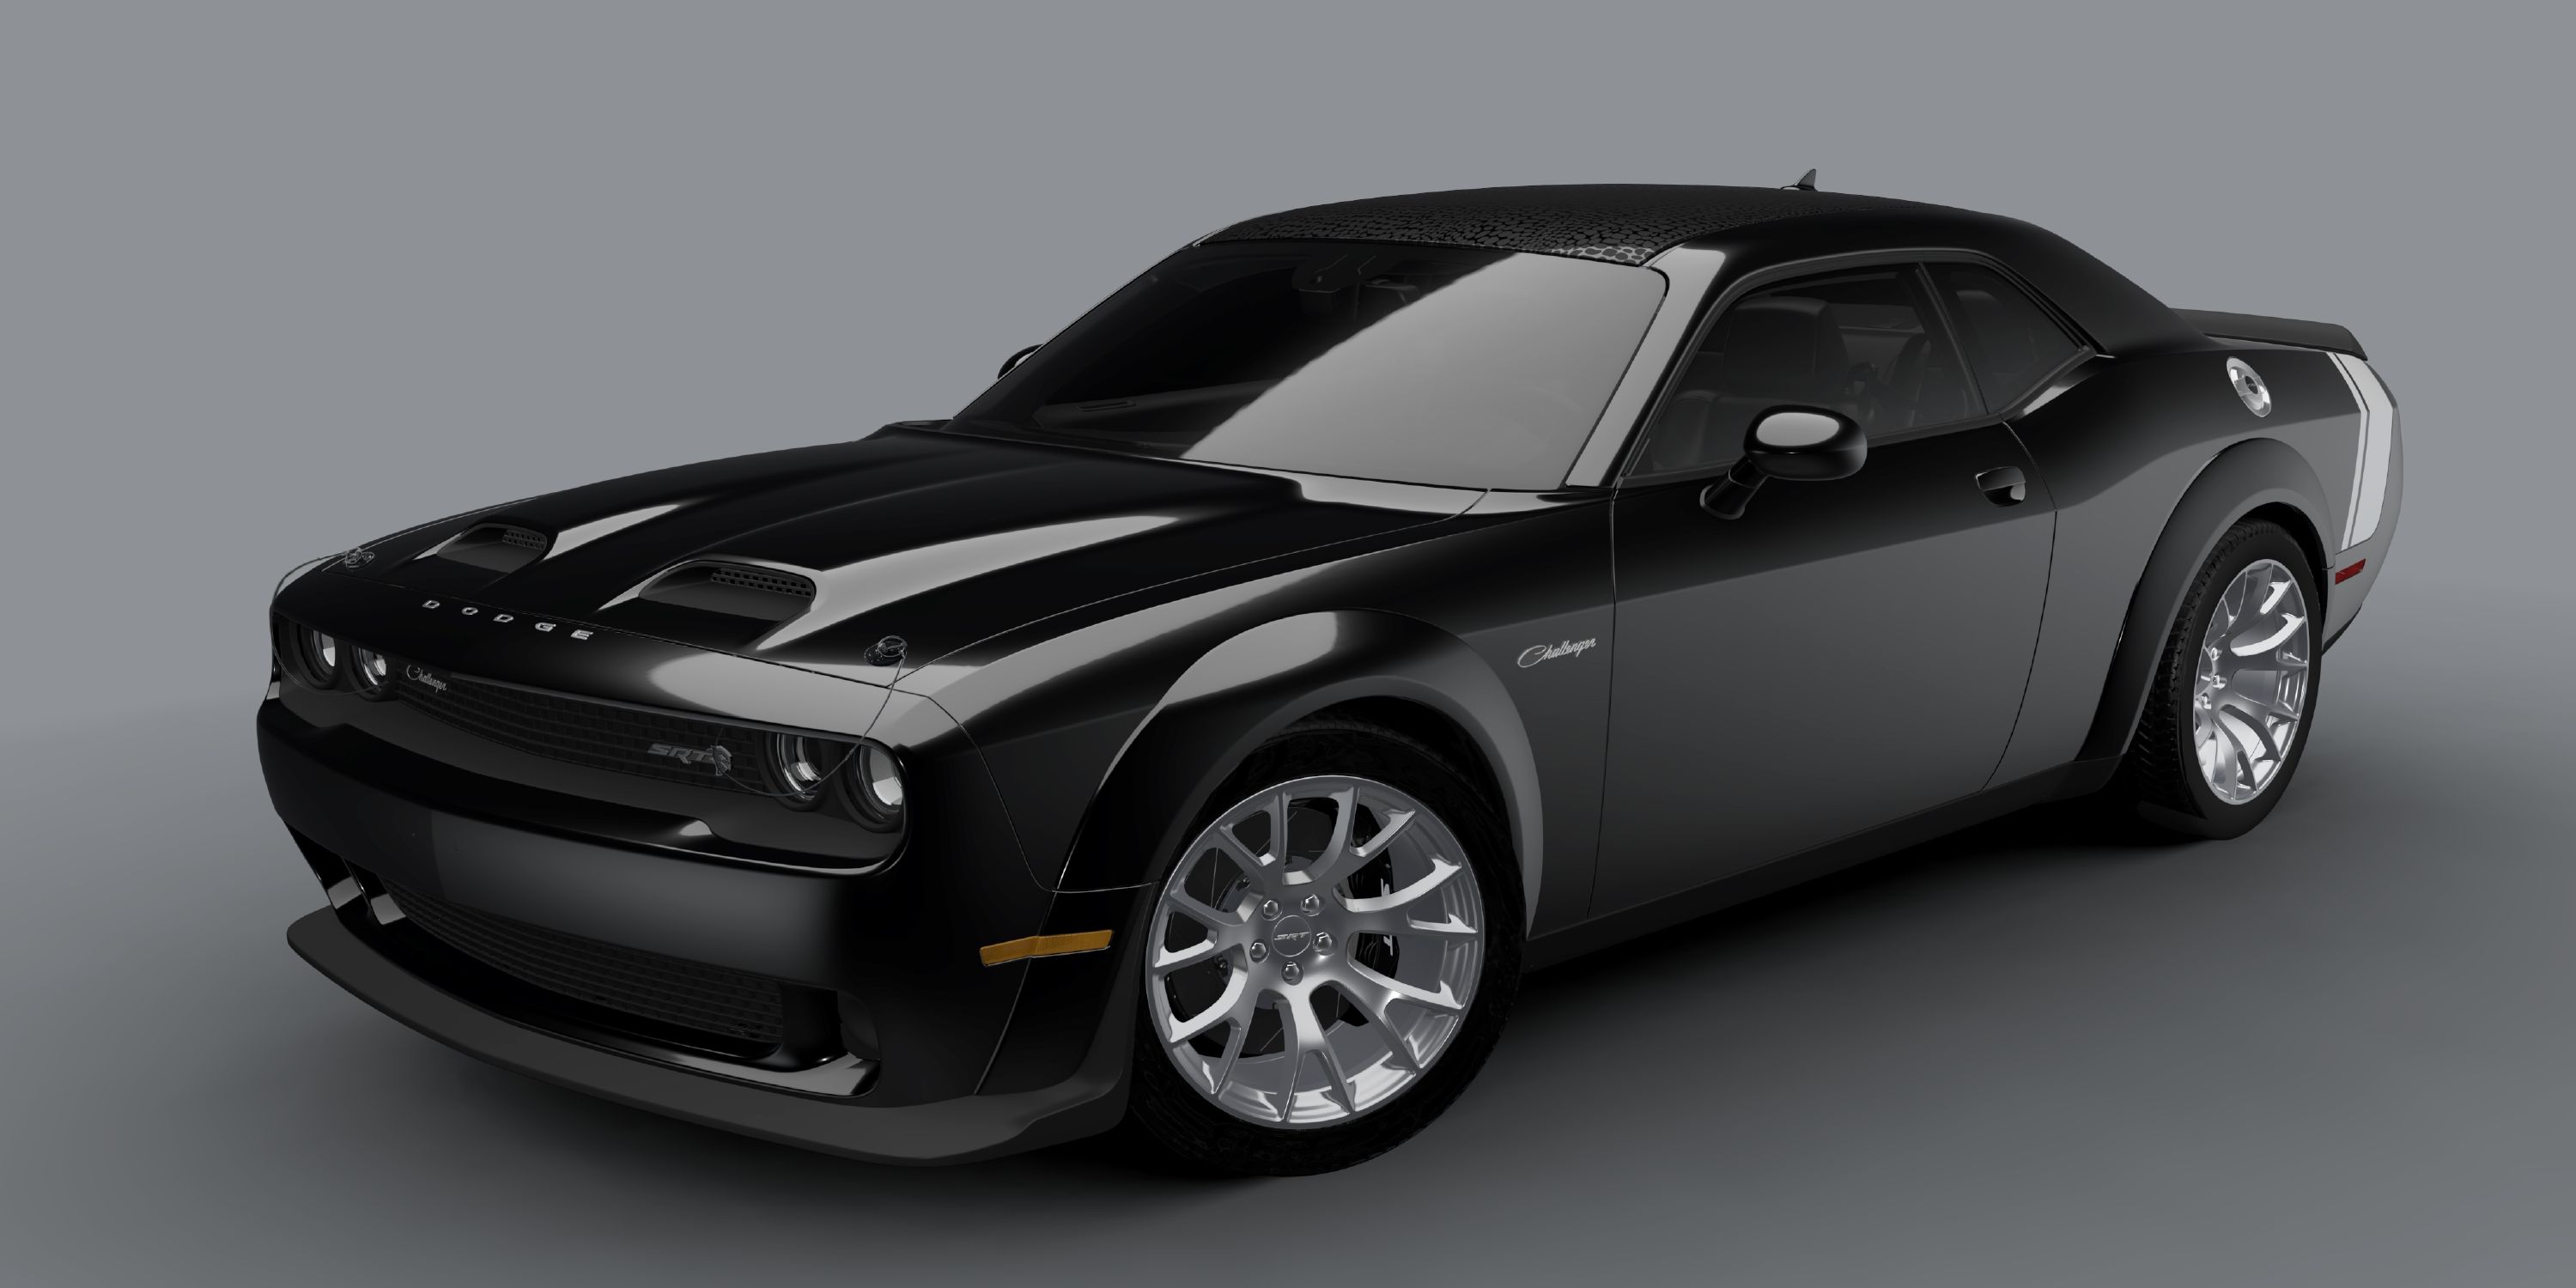 The Dodge Challenger Black Ghost Honors a Woodward Hero